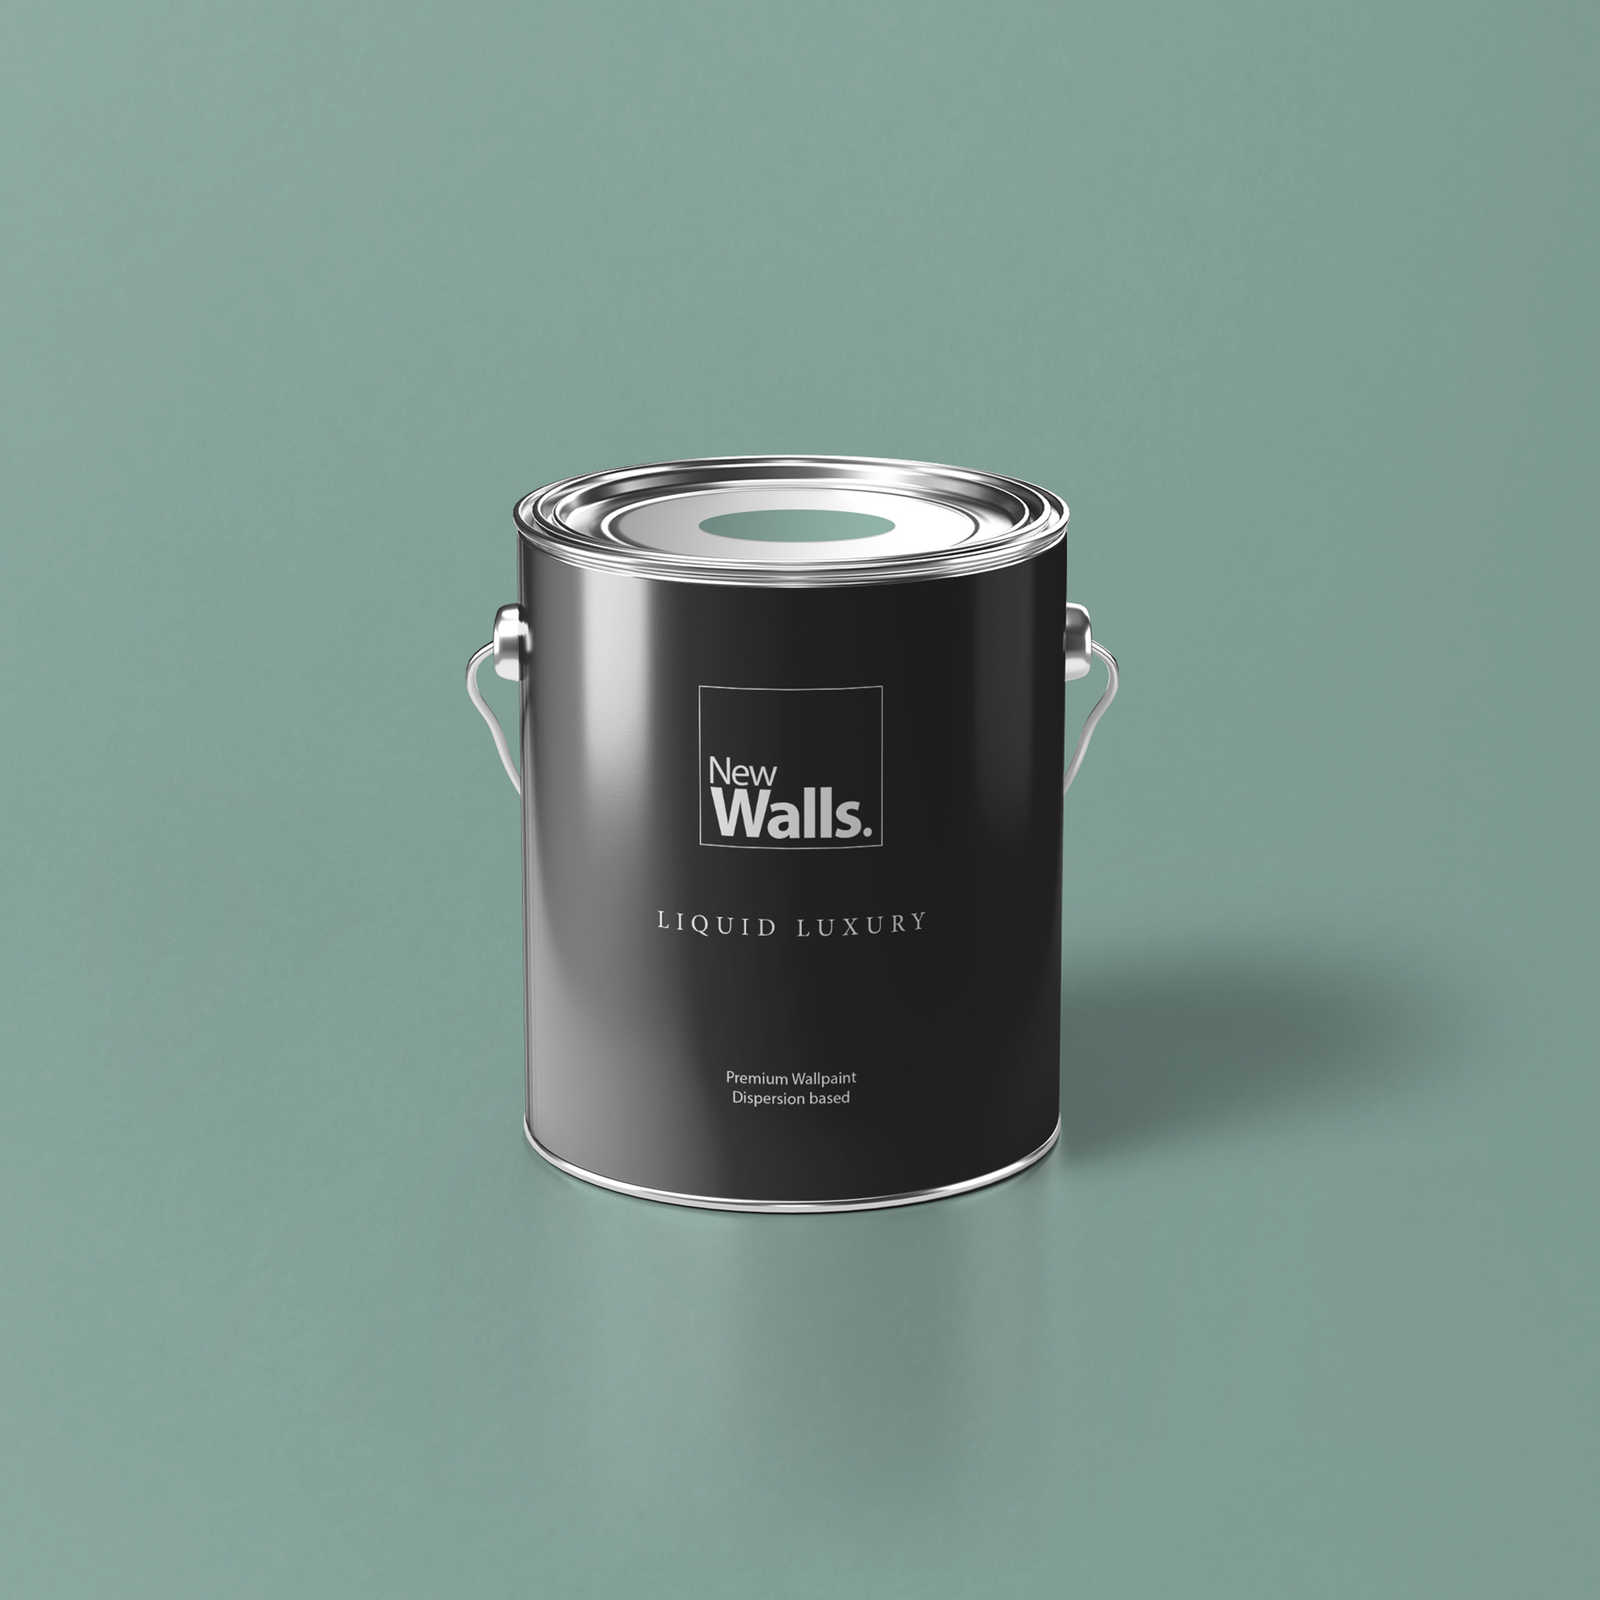 Premium Wall Paint Friendly Jade Green »Sweet Sage« NW402 – 2.5 litre
